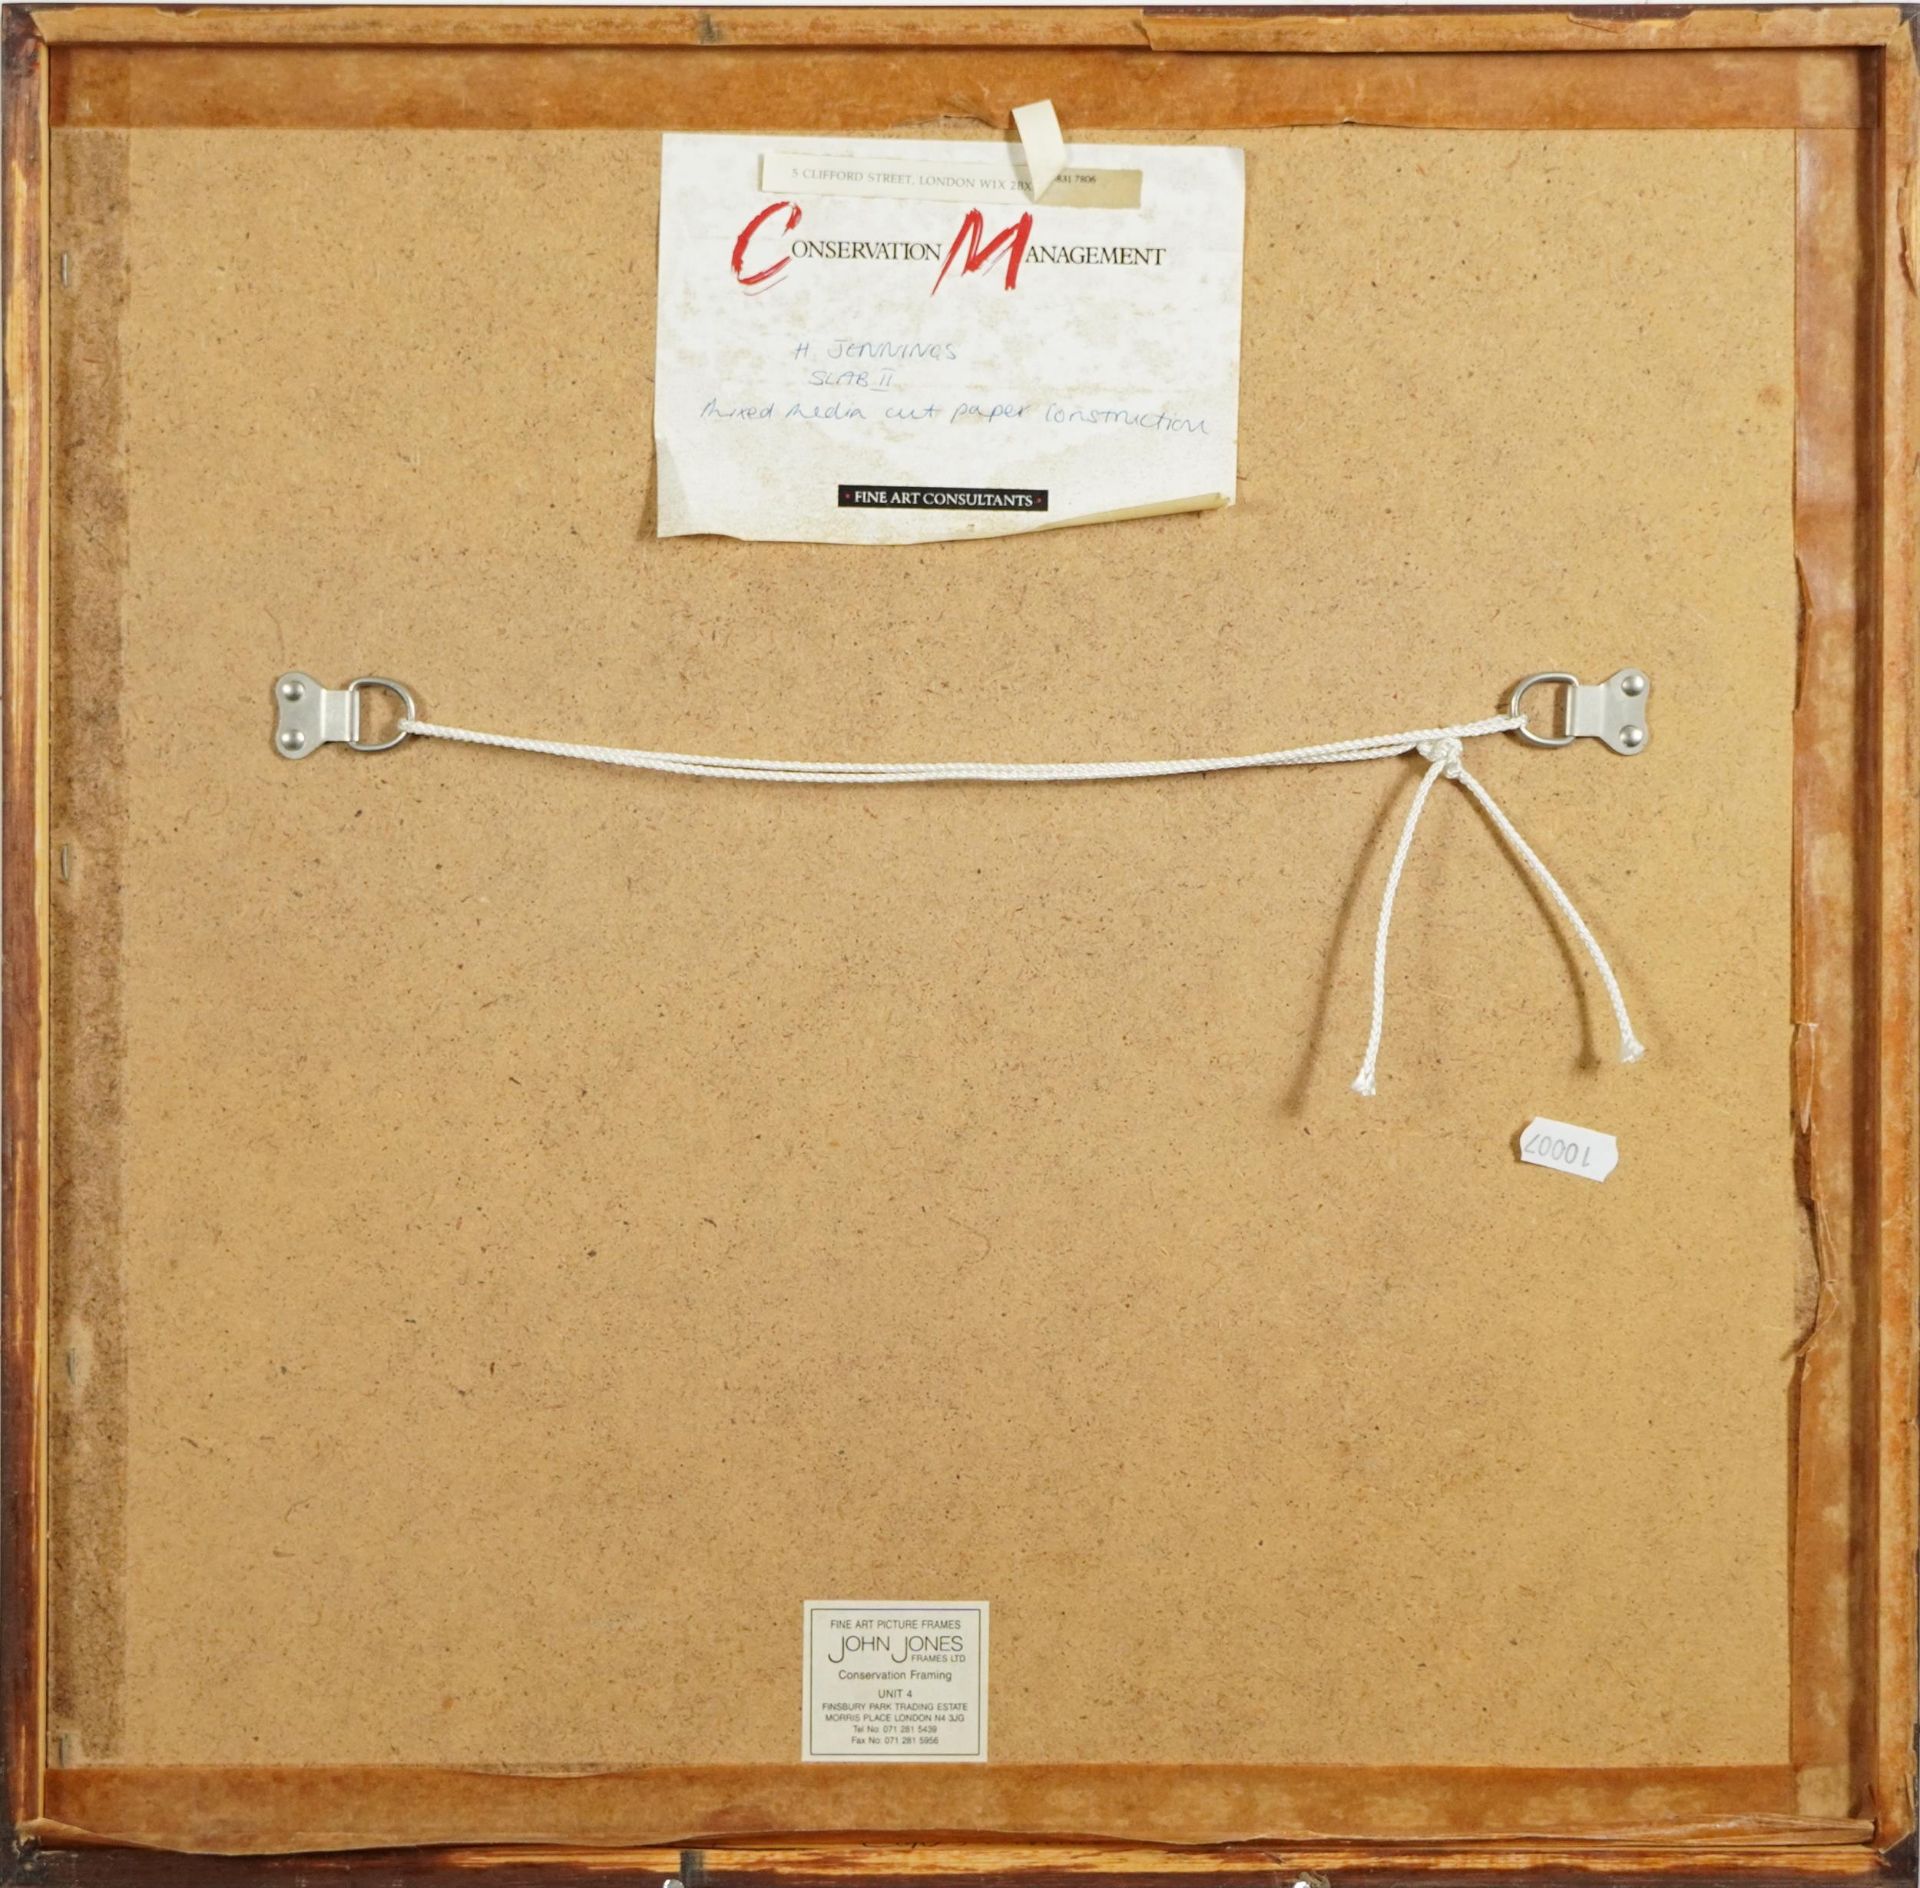 Helyne Jennings '89 - Slab II, mixed media and cut paper construction, Conservation Management label - Image 4 of 4